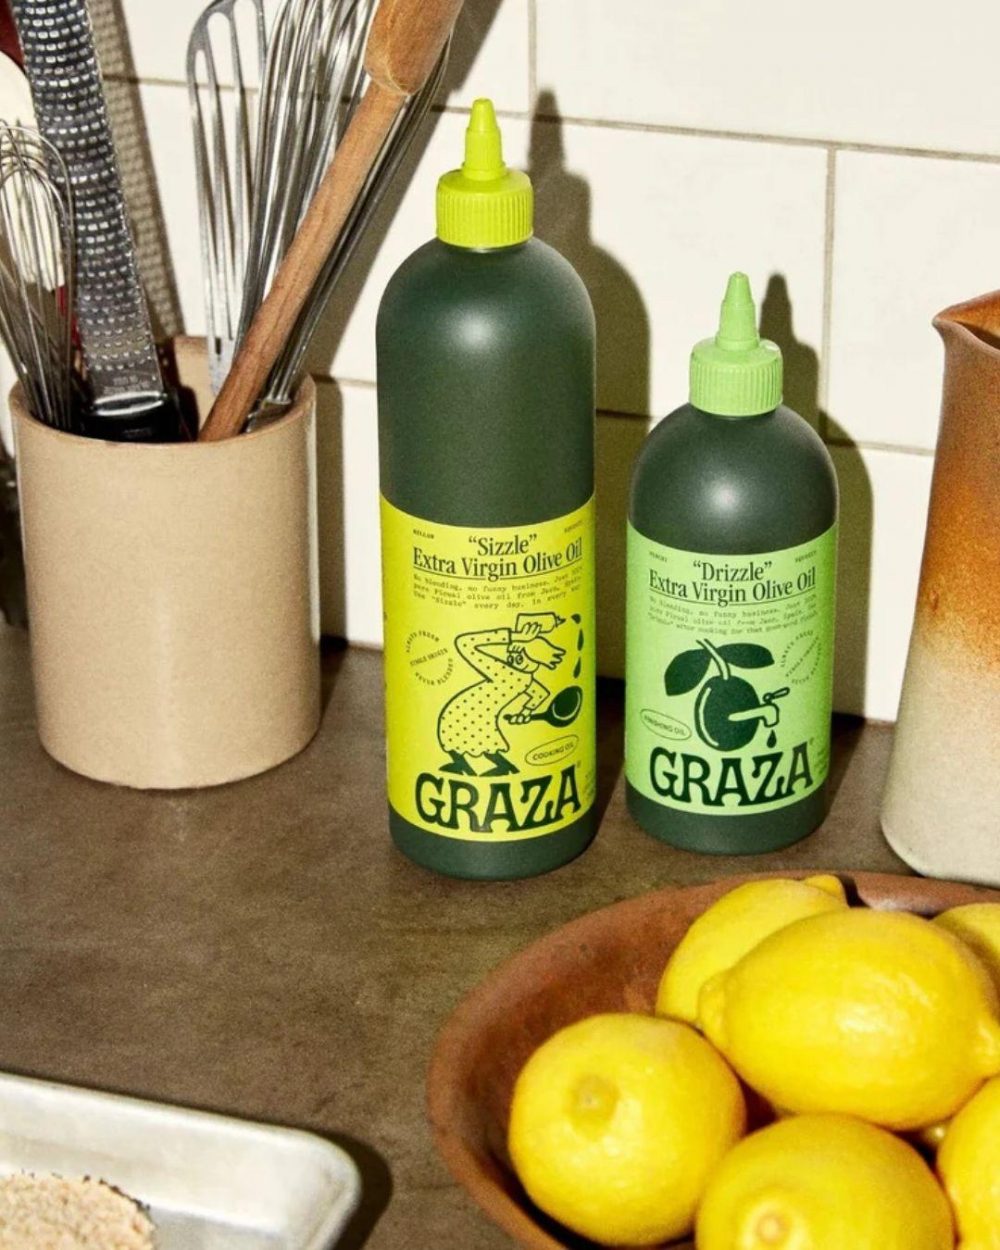 Maybe Don't Package Your Olive Oil In A Plastic Squeeze Bottle